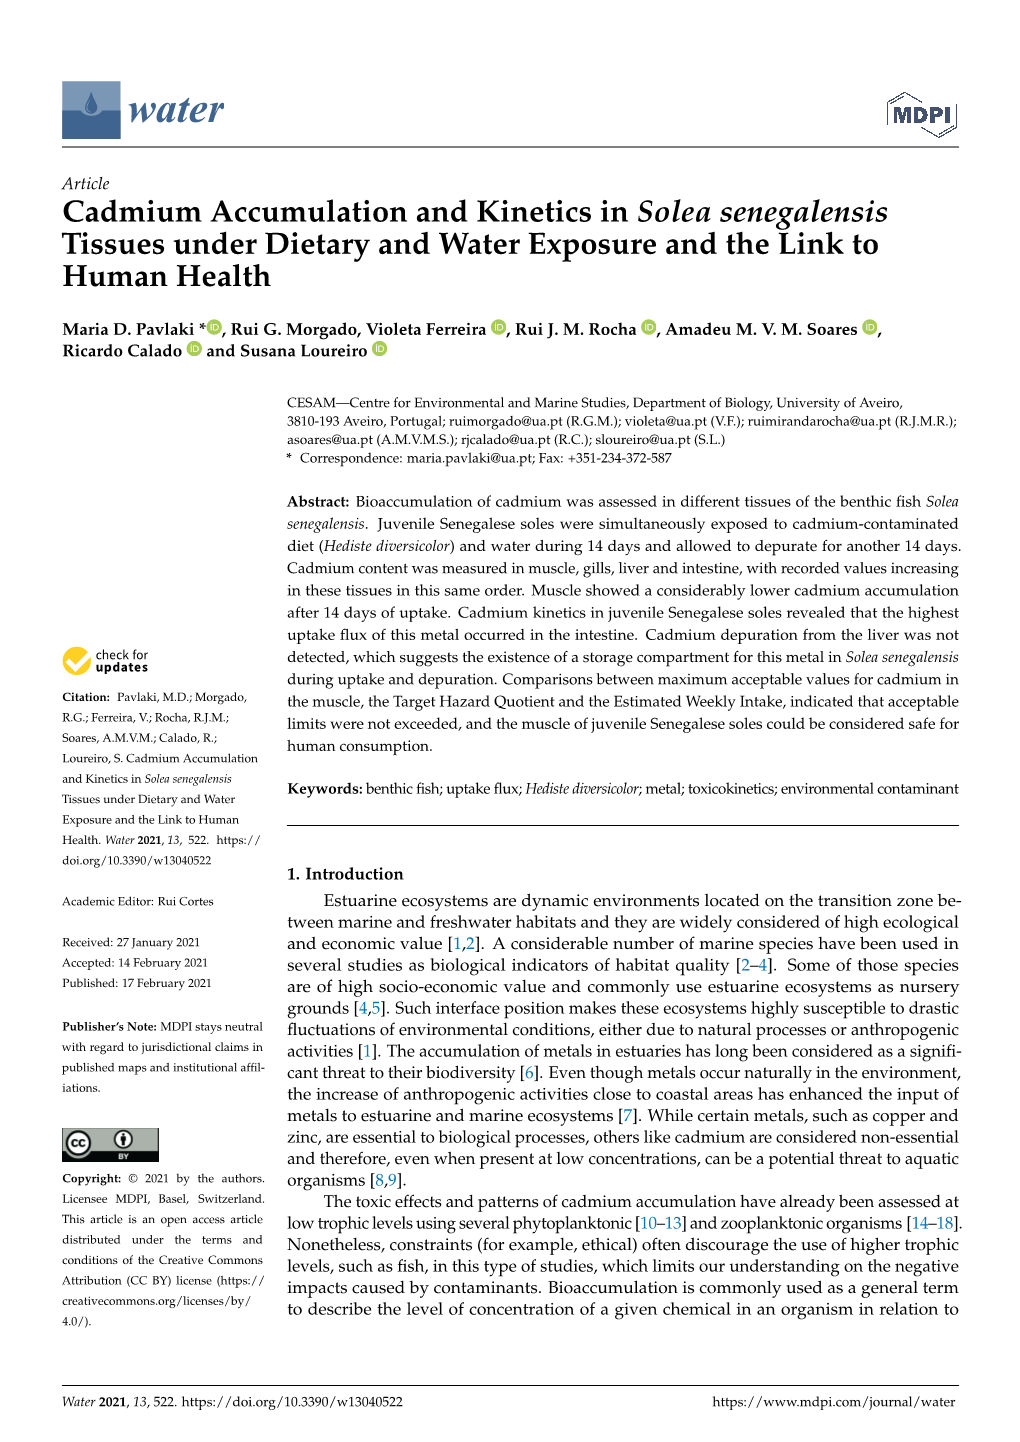 Cadmium Accumulation and Kinetics in Solea Senegalensis Tissues Under Dietary and Water Exposure and the Link to Human Health